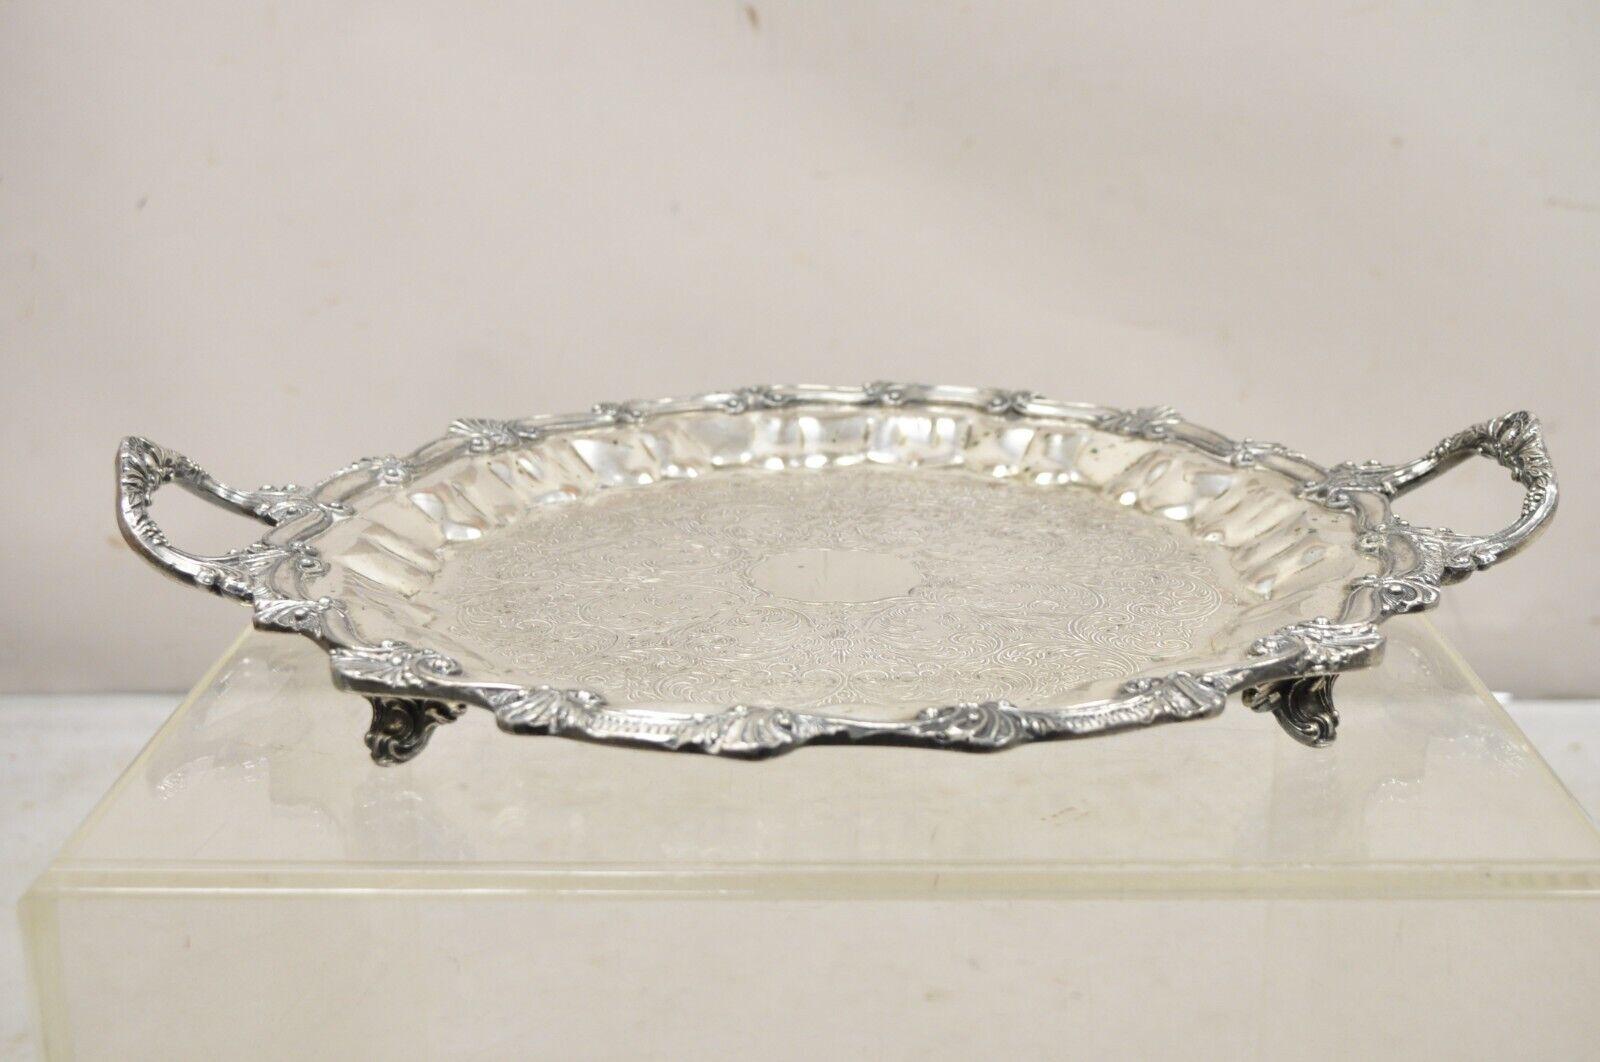 Vintage Victorian Style Silver Plated Scalloped Edge Round Serving Platter Tray. Circa Mid 20th Century. Measurements:  2.5